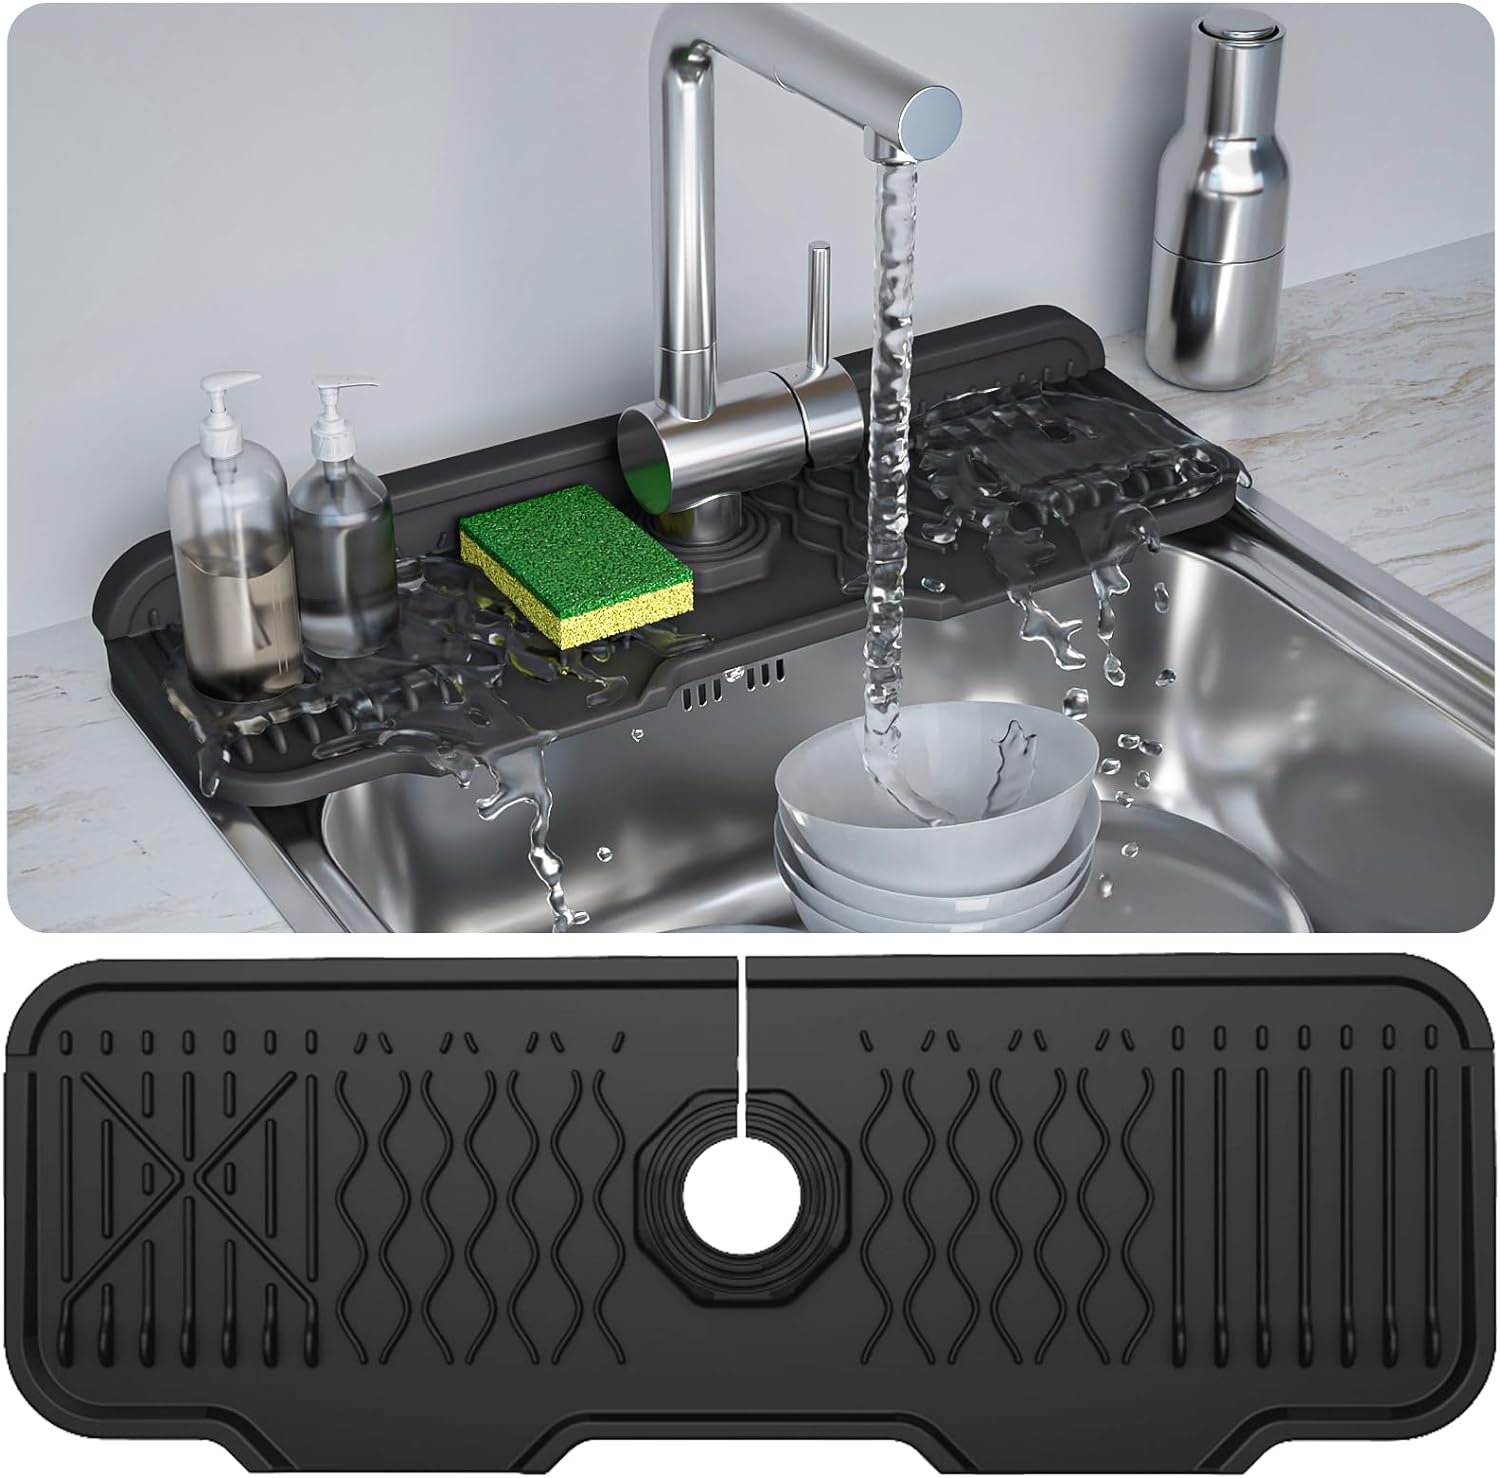 Kitchen Sink Splash Guard, Silicone Draining Mat Kitchen Faucet, 90° Foldable Design to Accommodate a Variety of Sink Countertops Black (17* 5.9)